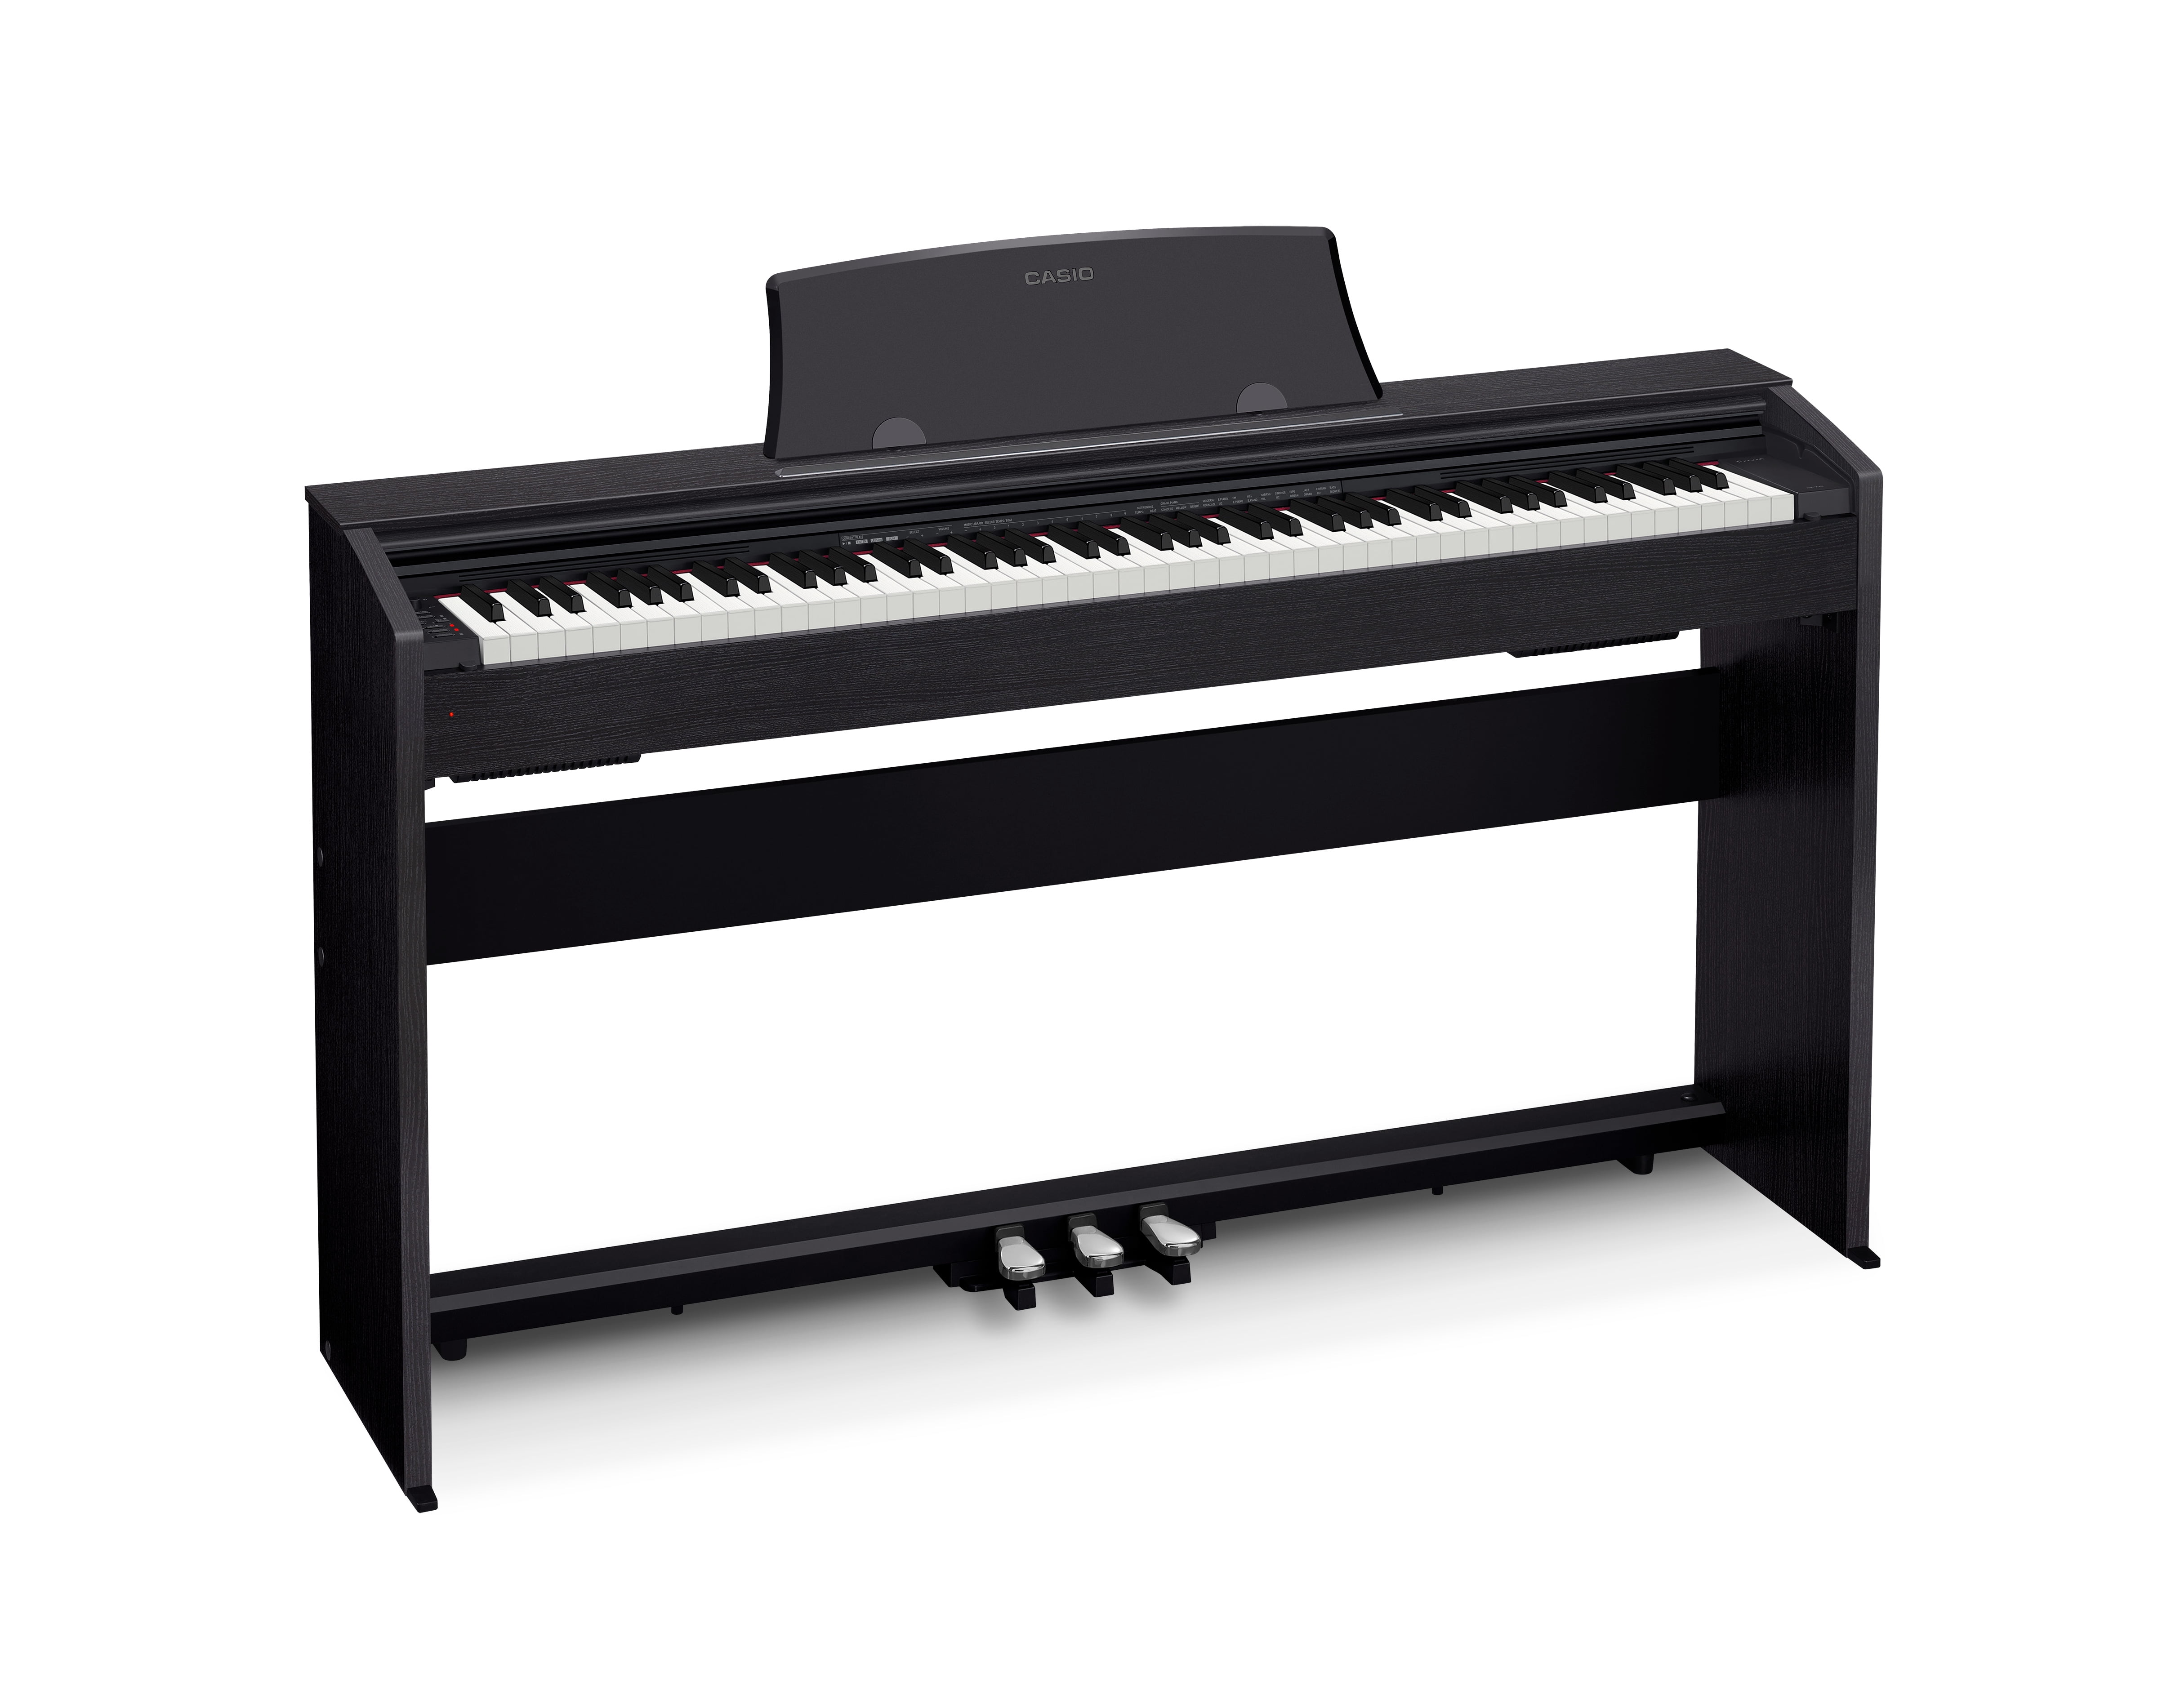 PX770 Privia 88-Key Home Piano with Scaled, Weighted Hammer-Action Keys, Black - Walmart.com